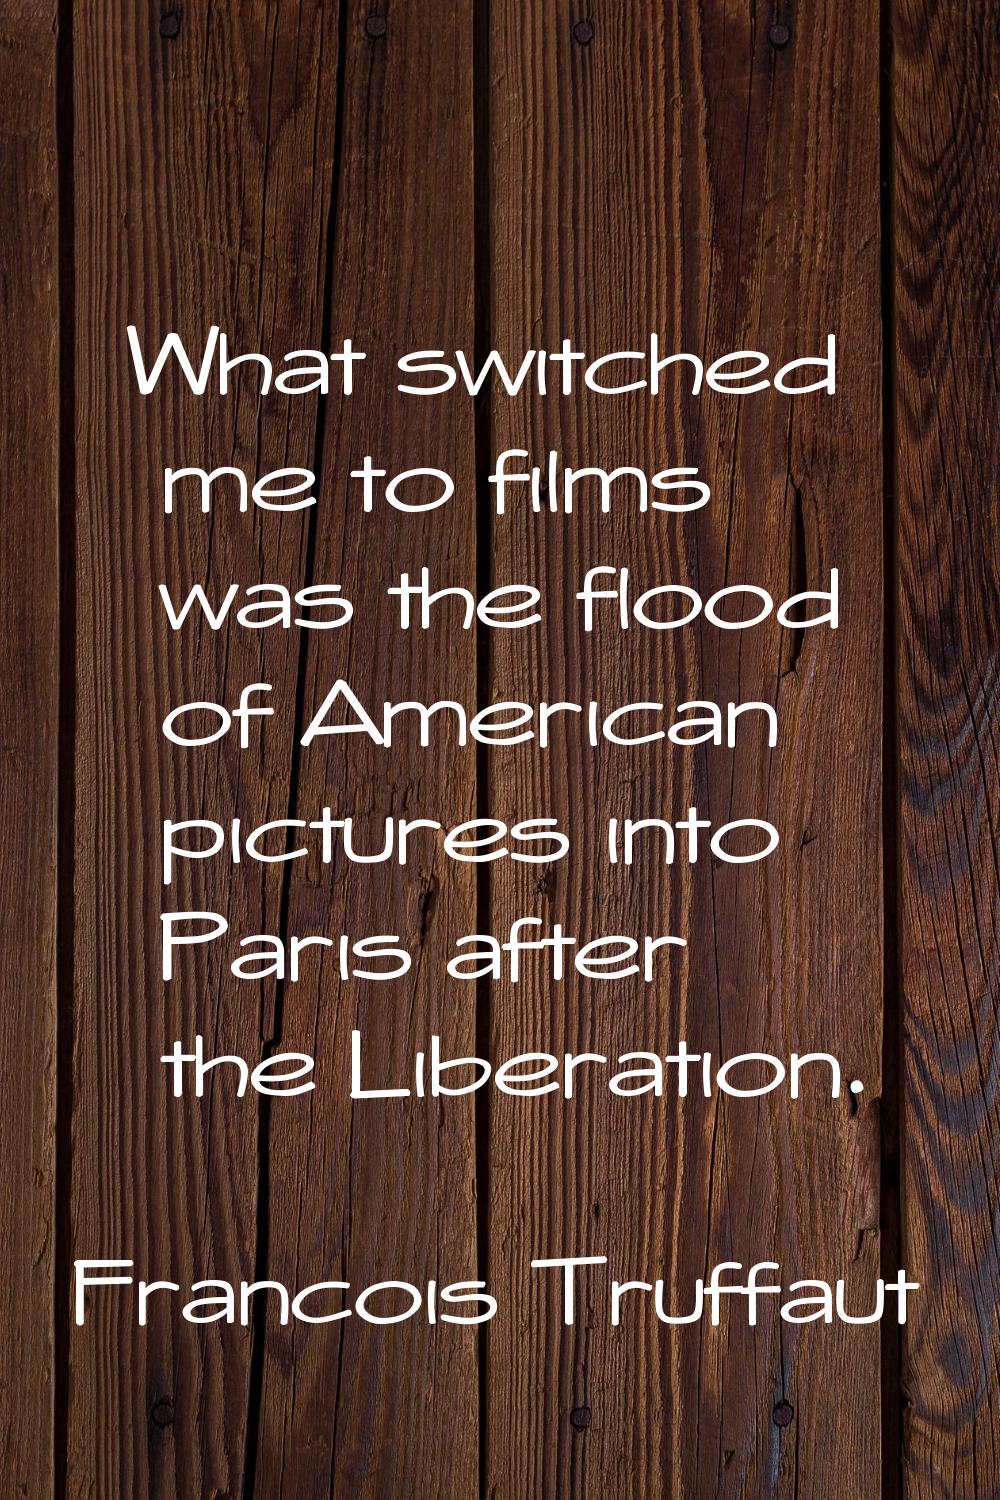 What switched me to films was the flood of American pictures into Paris after the Liberation.